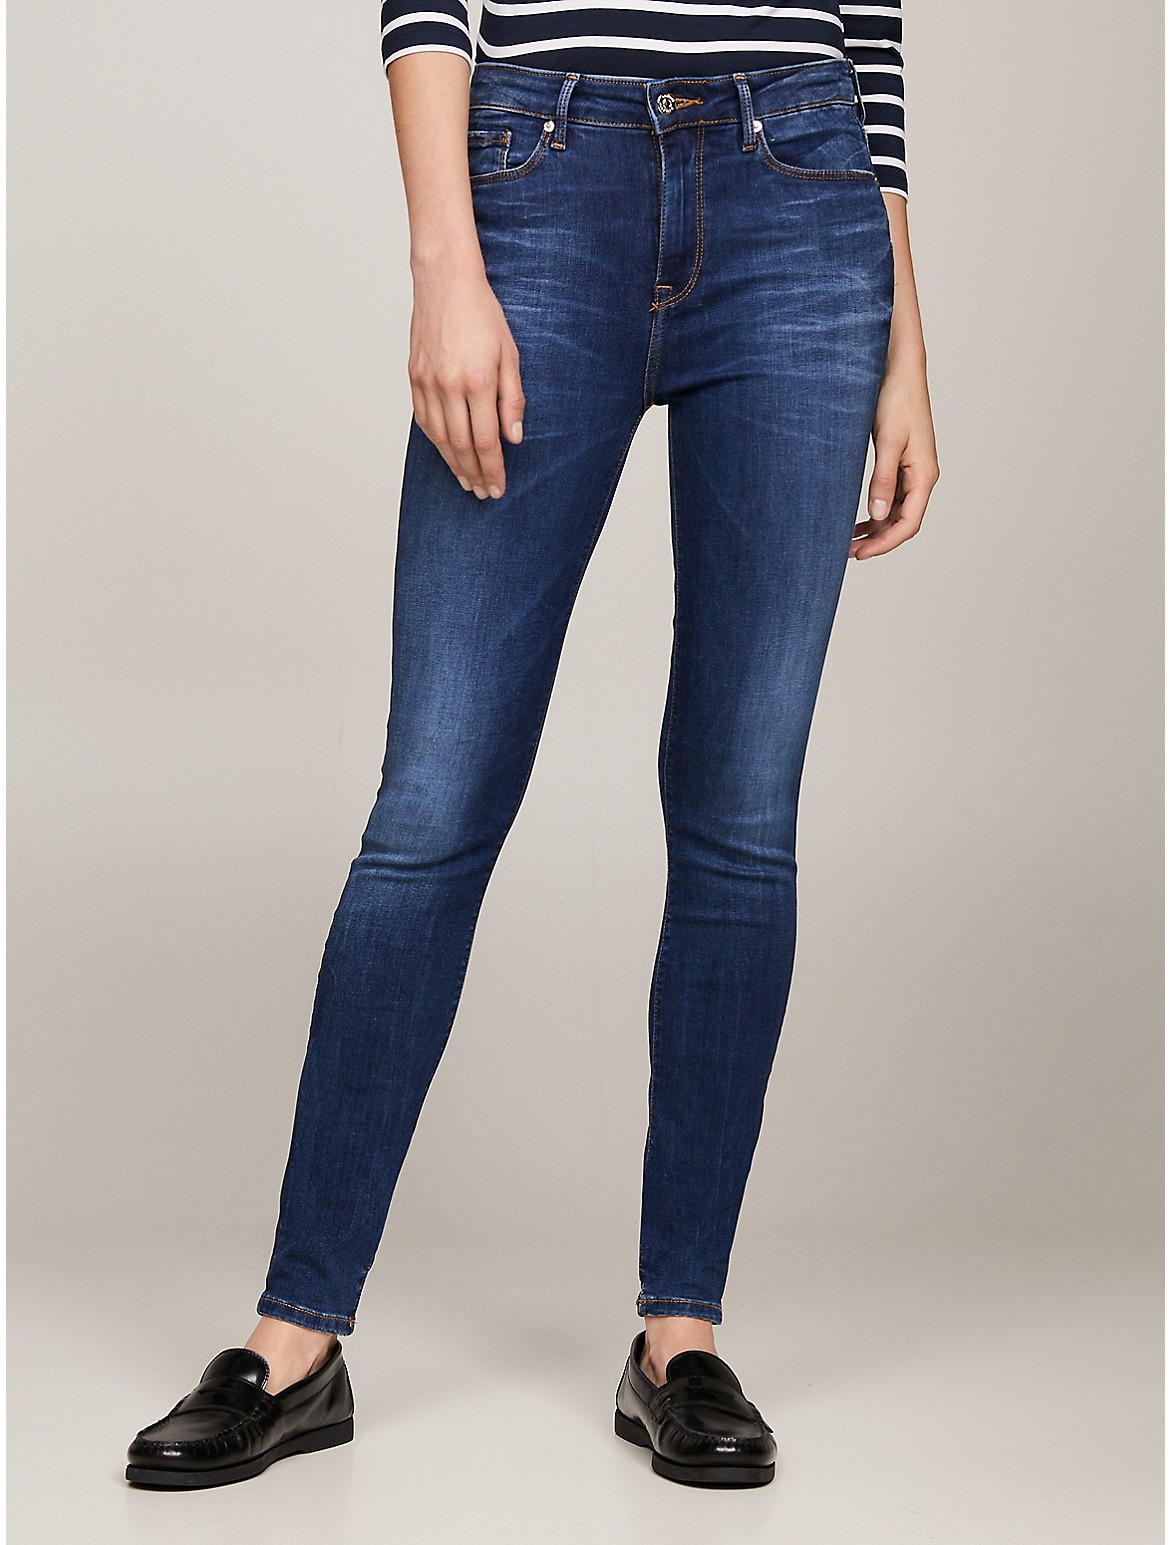 Jeans TOMMY HILFIGER for Women ModeSens |